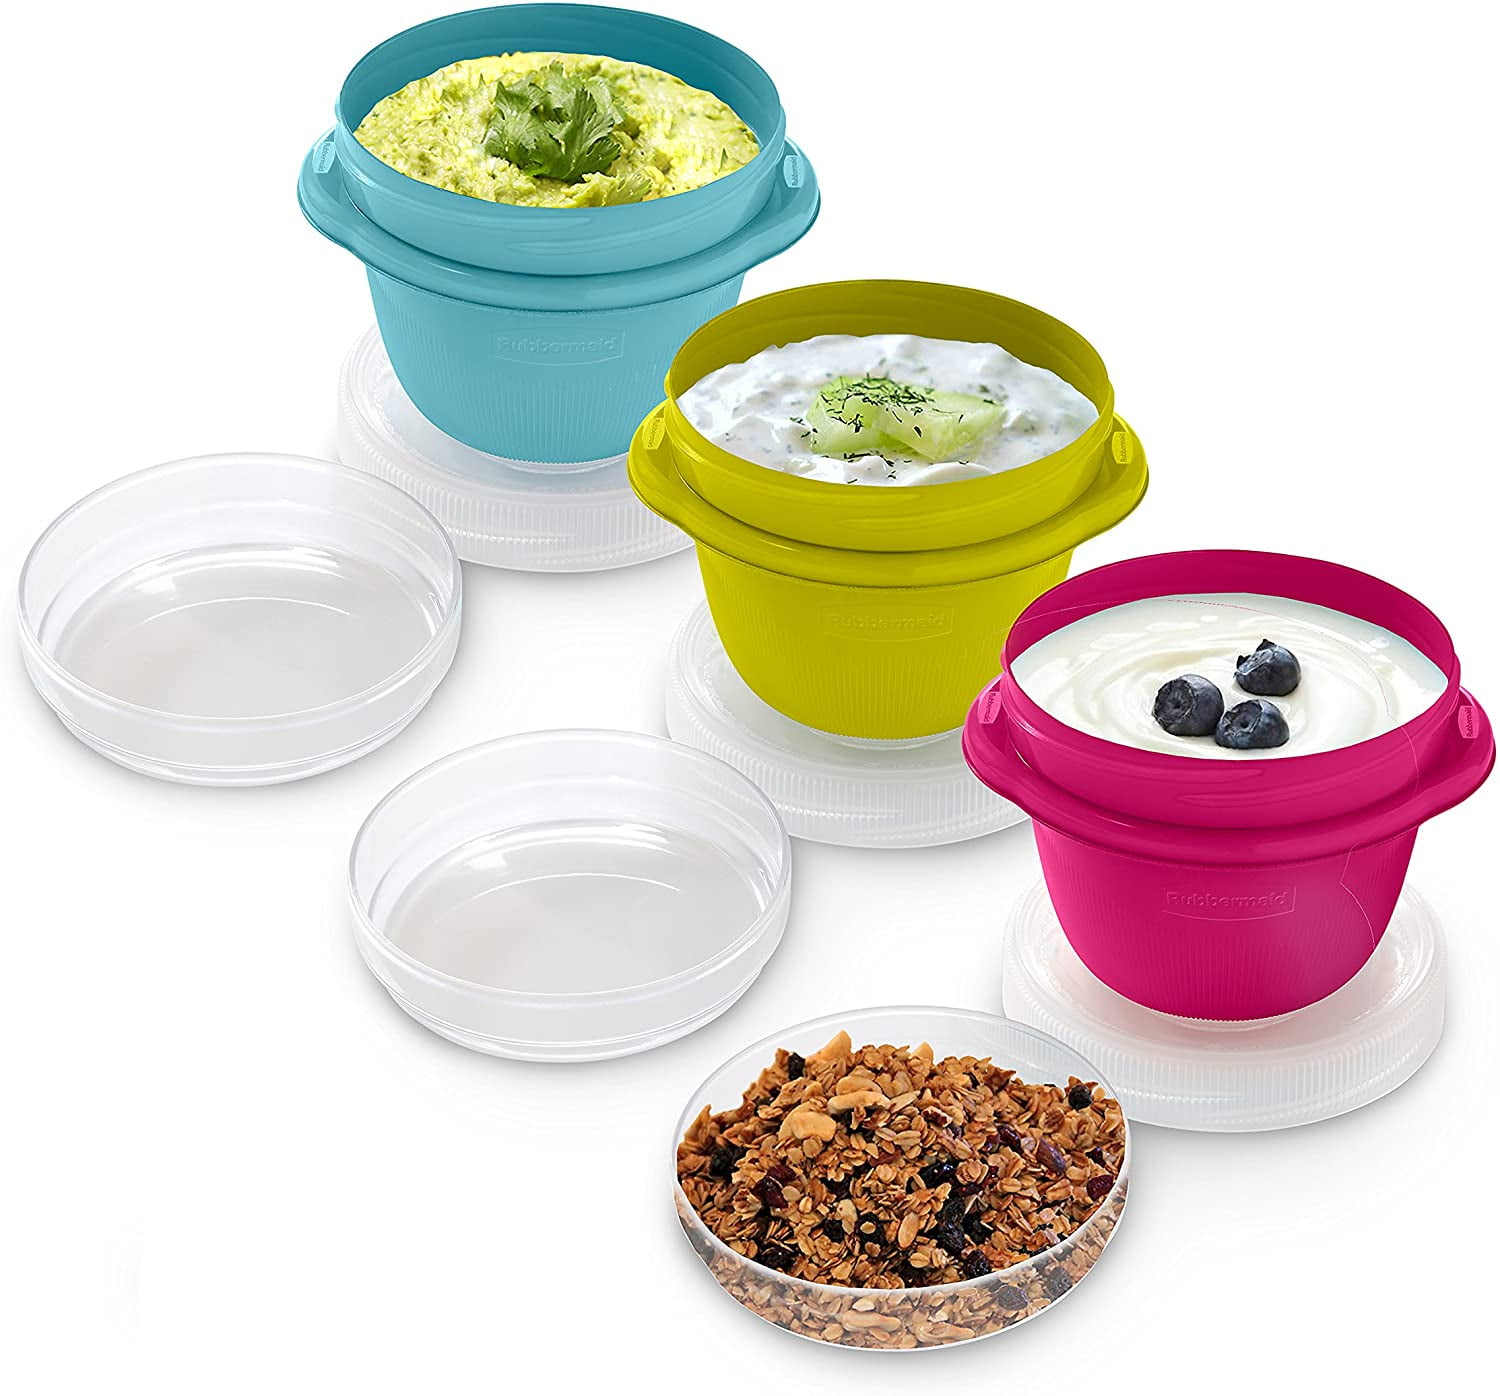  Rubbermaid TakeAlongs Divided Snacking Food Storage Containers,  2.2 Cup, Tint Chili, 3 Count: Food Storage Containers: Home & Kitchen